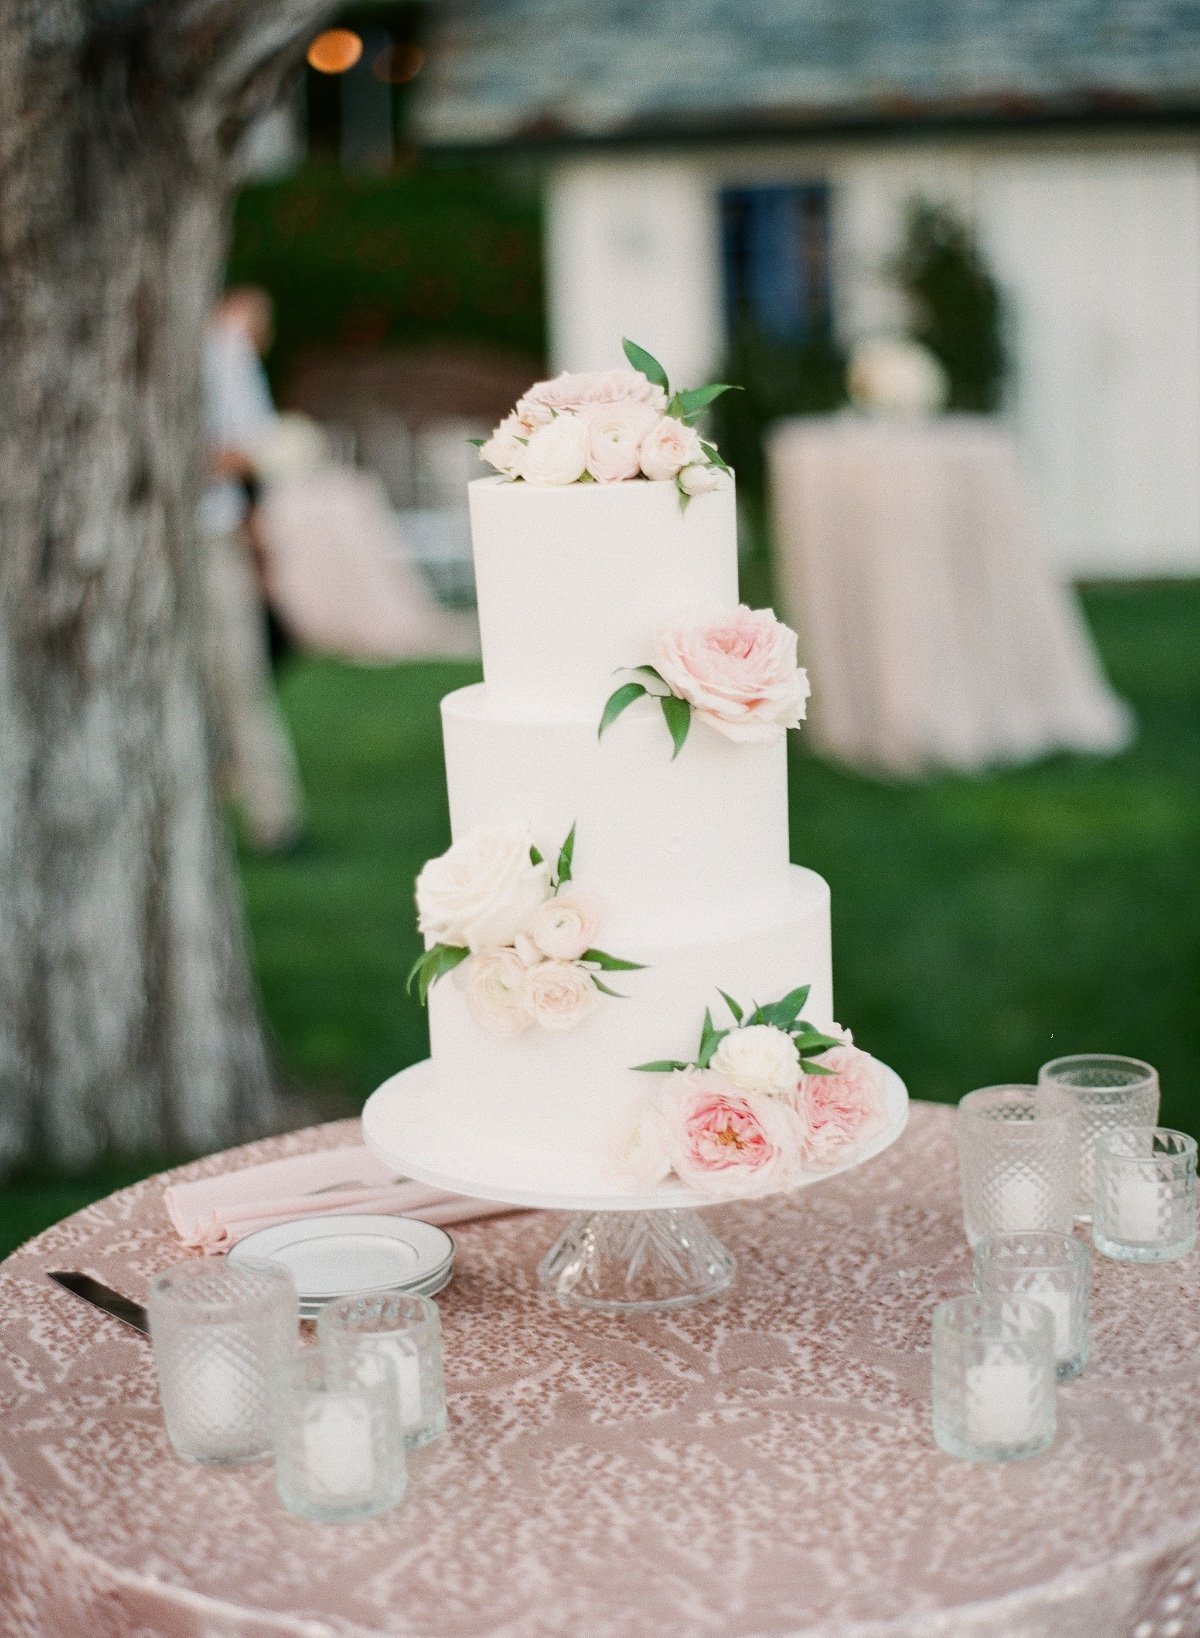 white wedding cake adorned with pink flowers